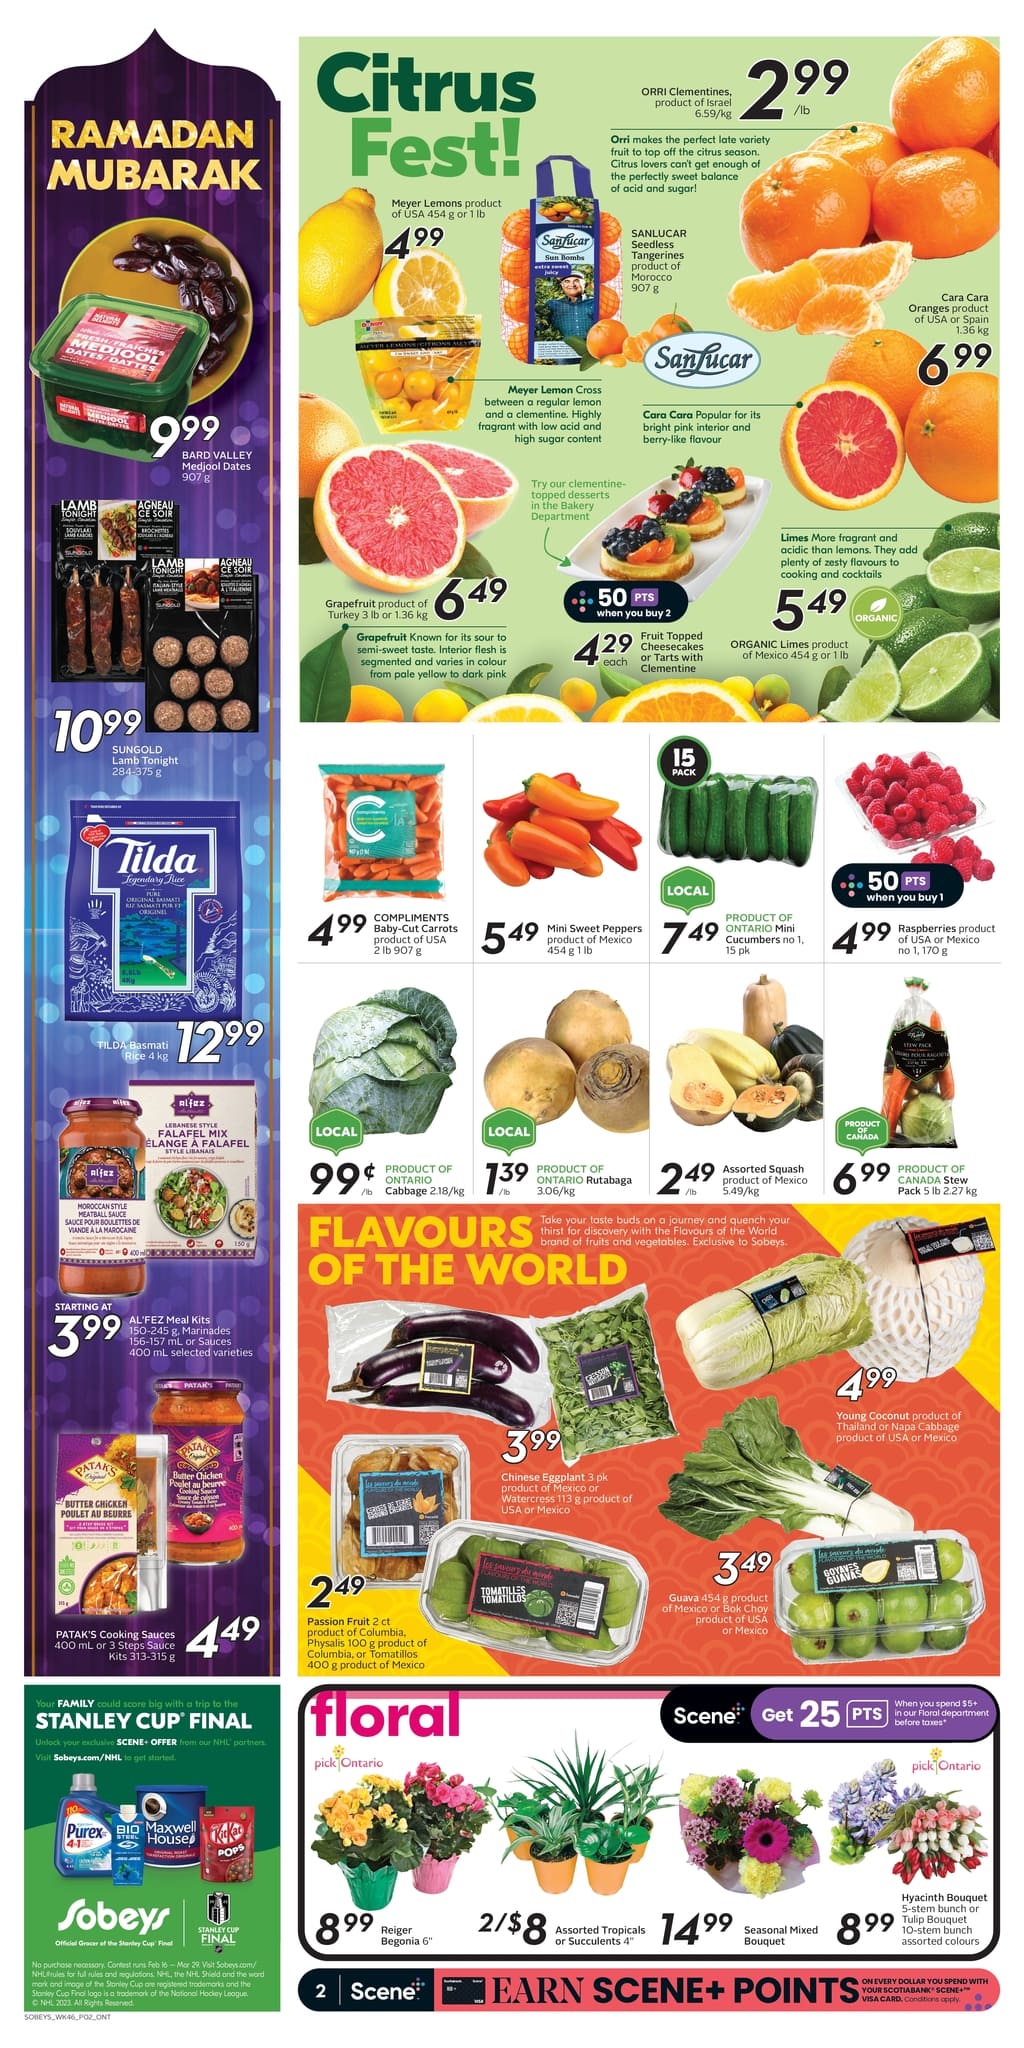 Sobeys - Weekly Flyer Specials - Page 4